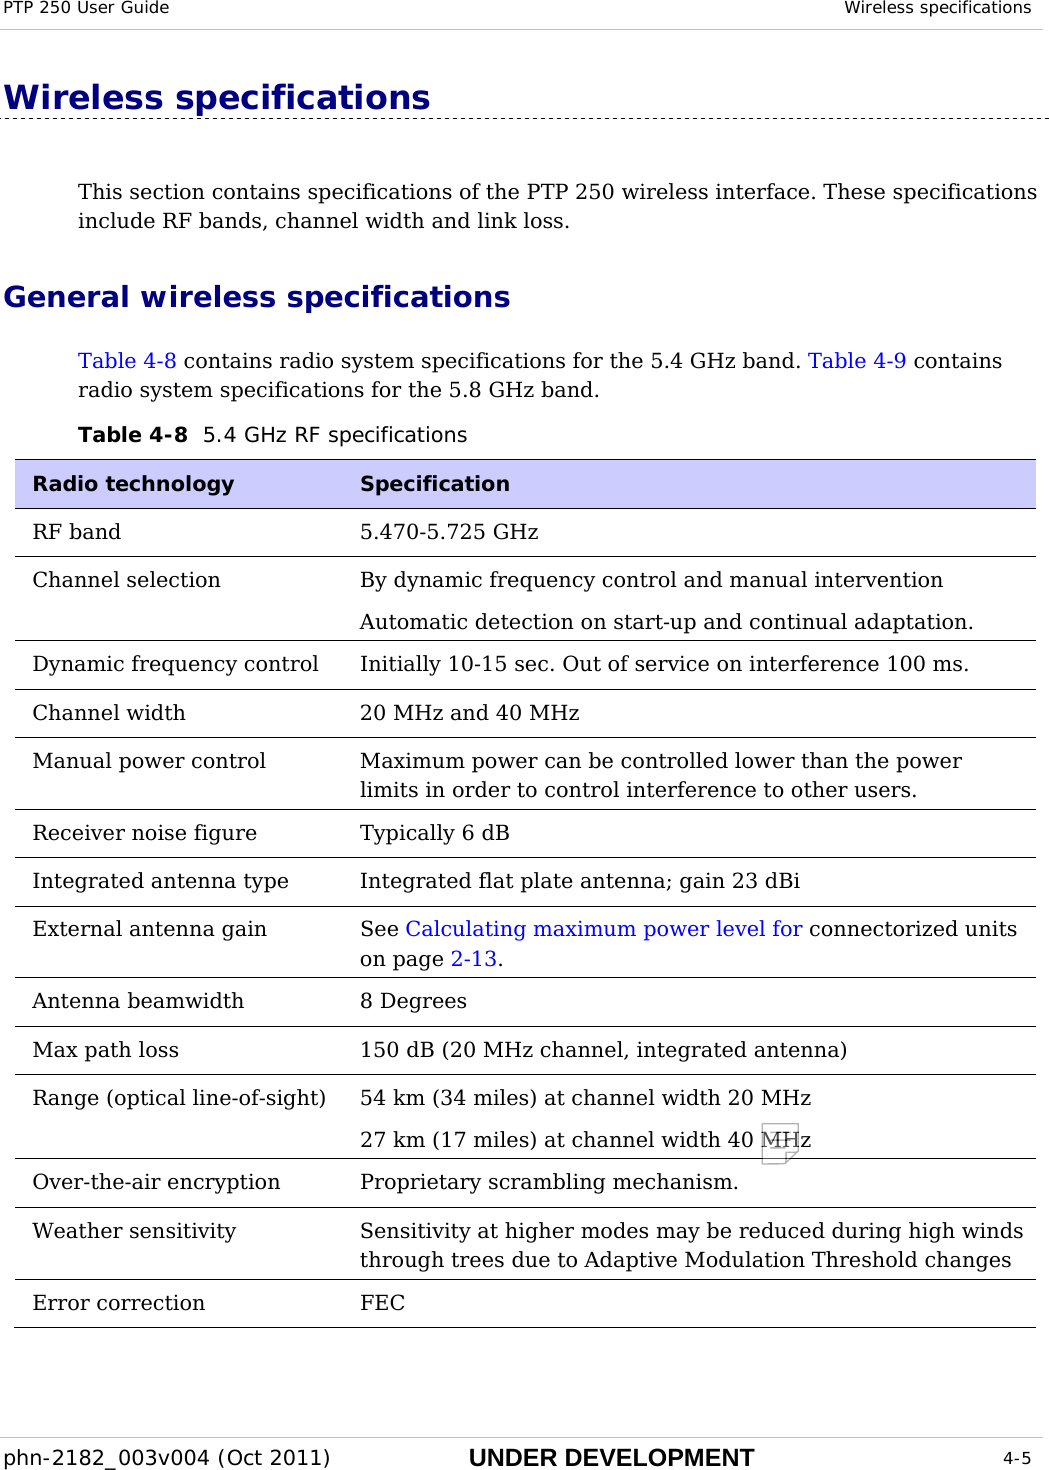 PTP 250 User Guide  Wireless specifications  phn-2182_003v004 (Oct 2011)  UNDER DEVELOPMENT  4-5  Wireless specifications This section contains specifications of the PTP 250 wireless interface. These specifications include RF bands, channel width and link loss. General wireless specifications Table 4-8 contains radio system specifications for the 5.4 GHz band. Table 4-9 contains radio system specifications for the 5.8 GHz band. Table 4-8  5.4 GHz RF specifications Radio technology   Specification  RF band   5.470-5.725 GHz Channel selection   By dynamic frequency control and manual intervention  Automatic detection on start-up and continual adaptation. Dynamic frequency control   Initially 10-15 sec. Out of service on interference 100 ms.  Channel width   20 MHz and 40 MHz Manual power control   Maximum power can be controlled lower than the power limits in order to control interference to other users. Receiver noise figure   Typically 6 dB  Integrated antenna type  Integrated flat plate antenna; gain 23 dBi External antenna gain  See Calculating maximum power level for connectorized units on page 2-13. Antenna beamwidth  8 Degrees Max path loss   150 dB (20 MHz channel, integrated antenna) Range (optical line-of-sight)  54 km (34 miles) at channel width 20 MHz 27 km (17 miles) at channel width 40 MHz Over-the-air encryption  Proprietary scrambling mechanism. Weather sensitivity  Sensitivity at higher modes may be reduced during high winds through trees due to Adaptive Modulation Threshold changes Error correction  FEC  